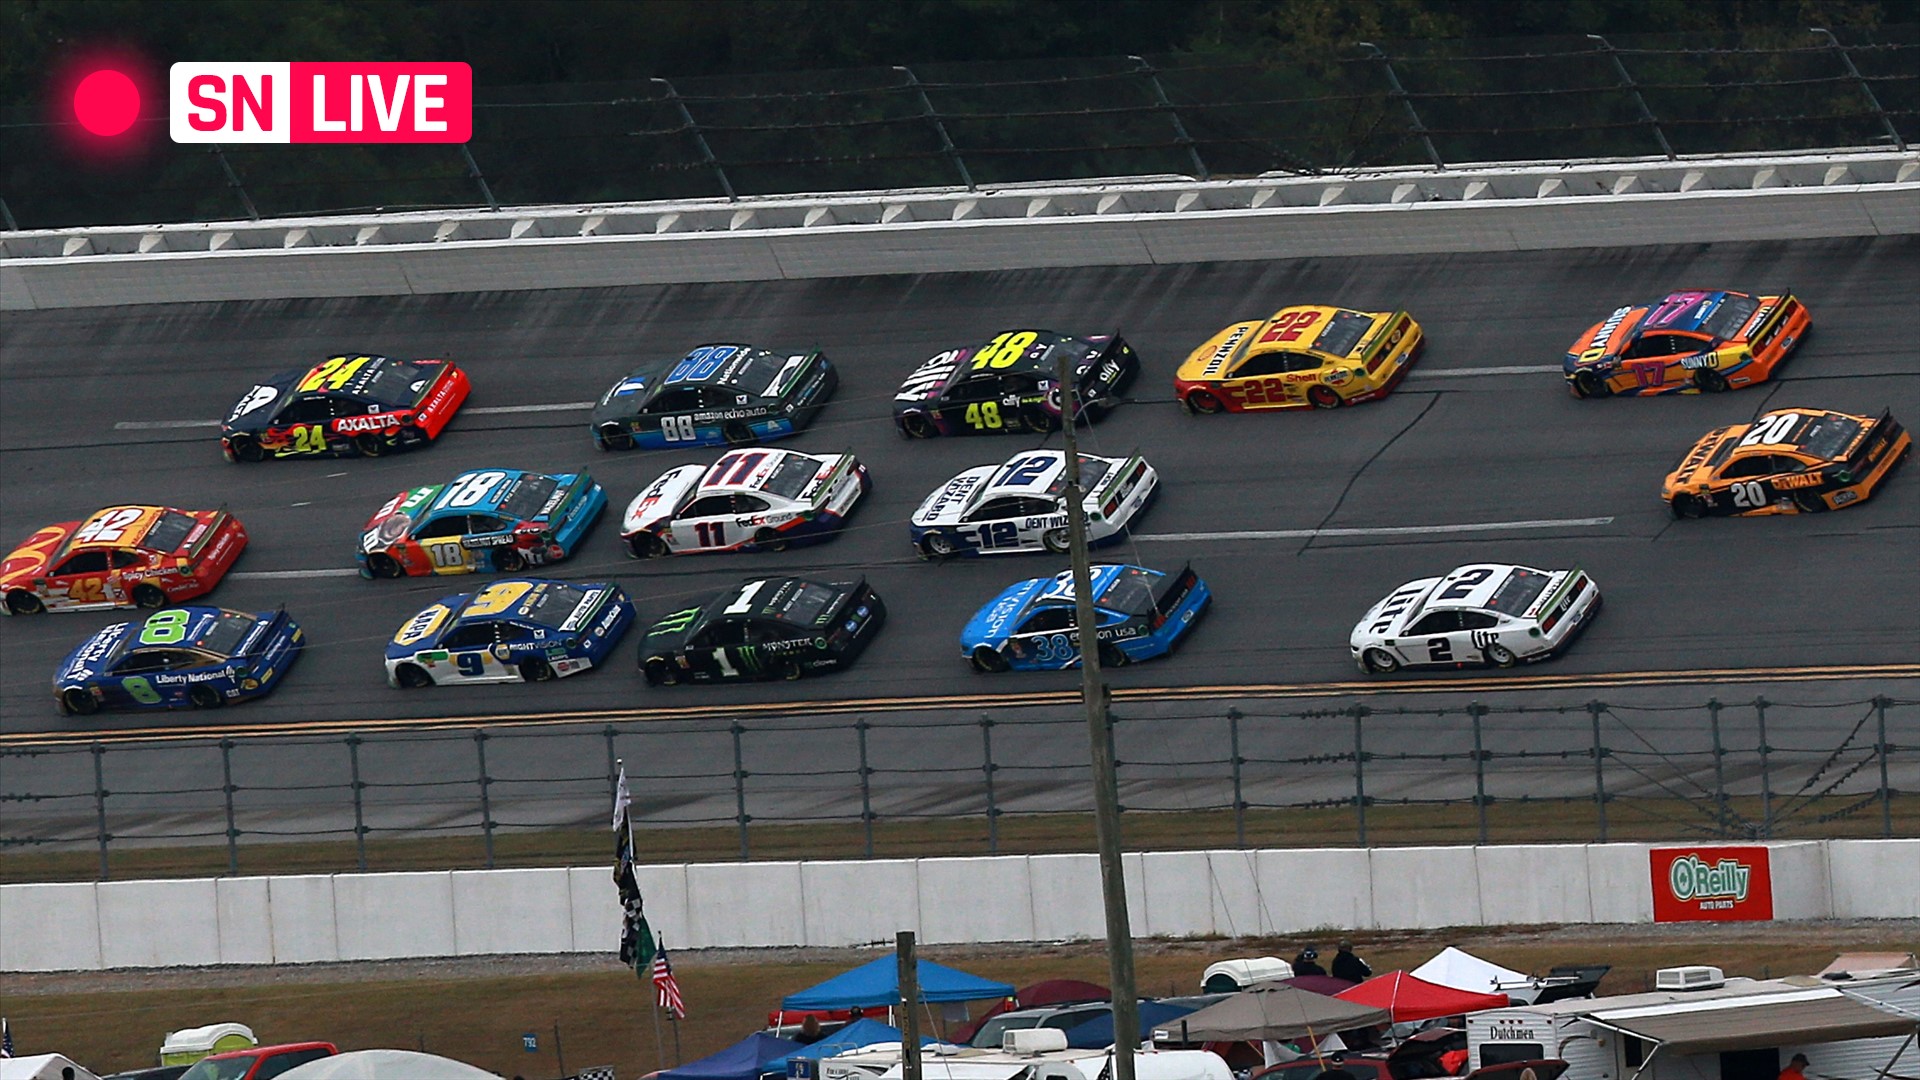 NASCAR at Talladega Live race updates, results, highlights from Monday